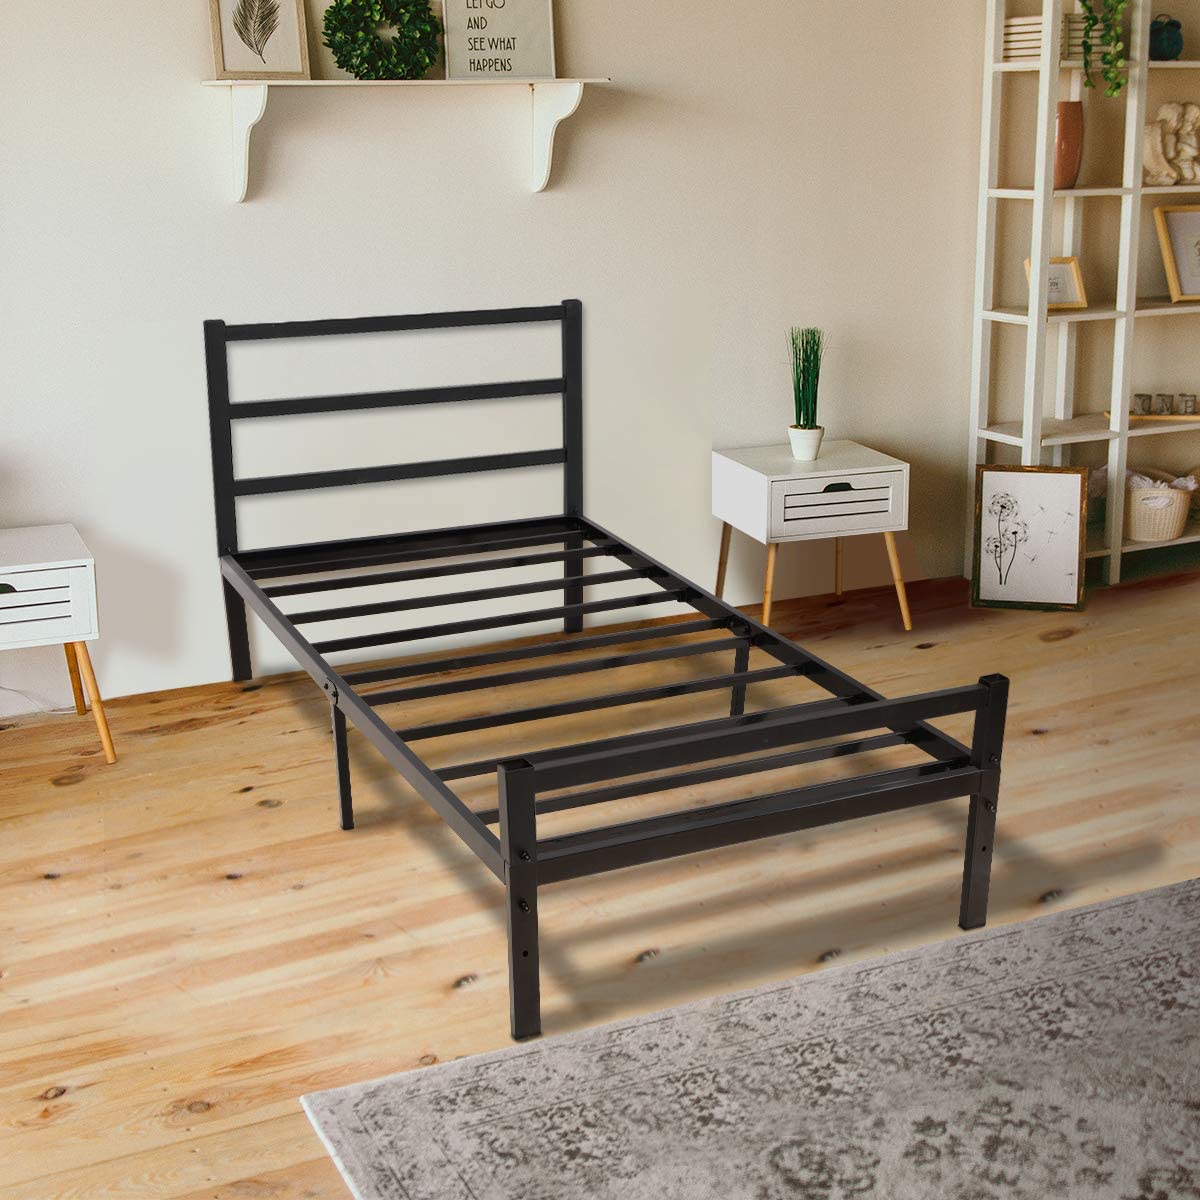 Kingso Twin Bed Frames With Headboard, Steel Twin Bed Frame